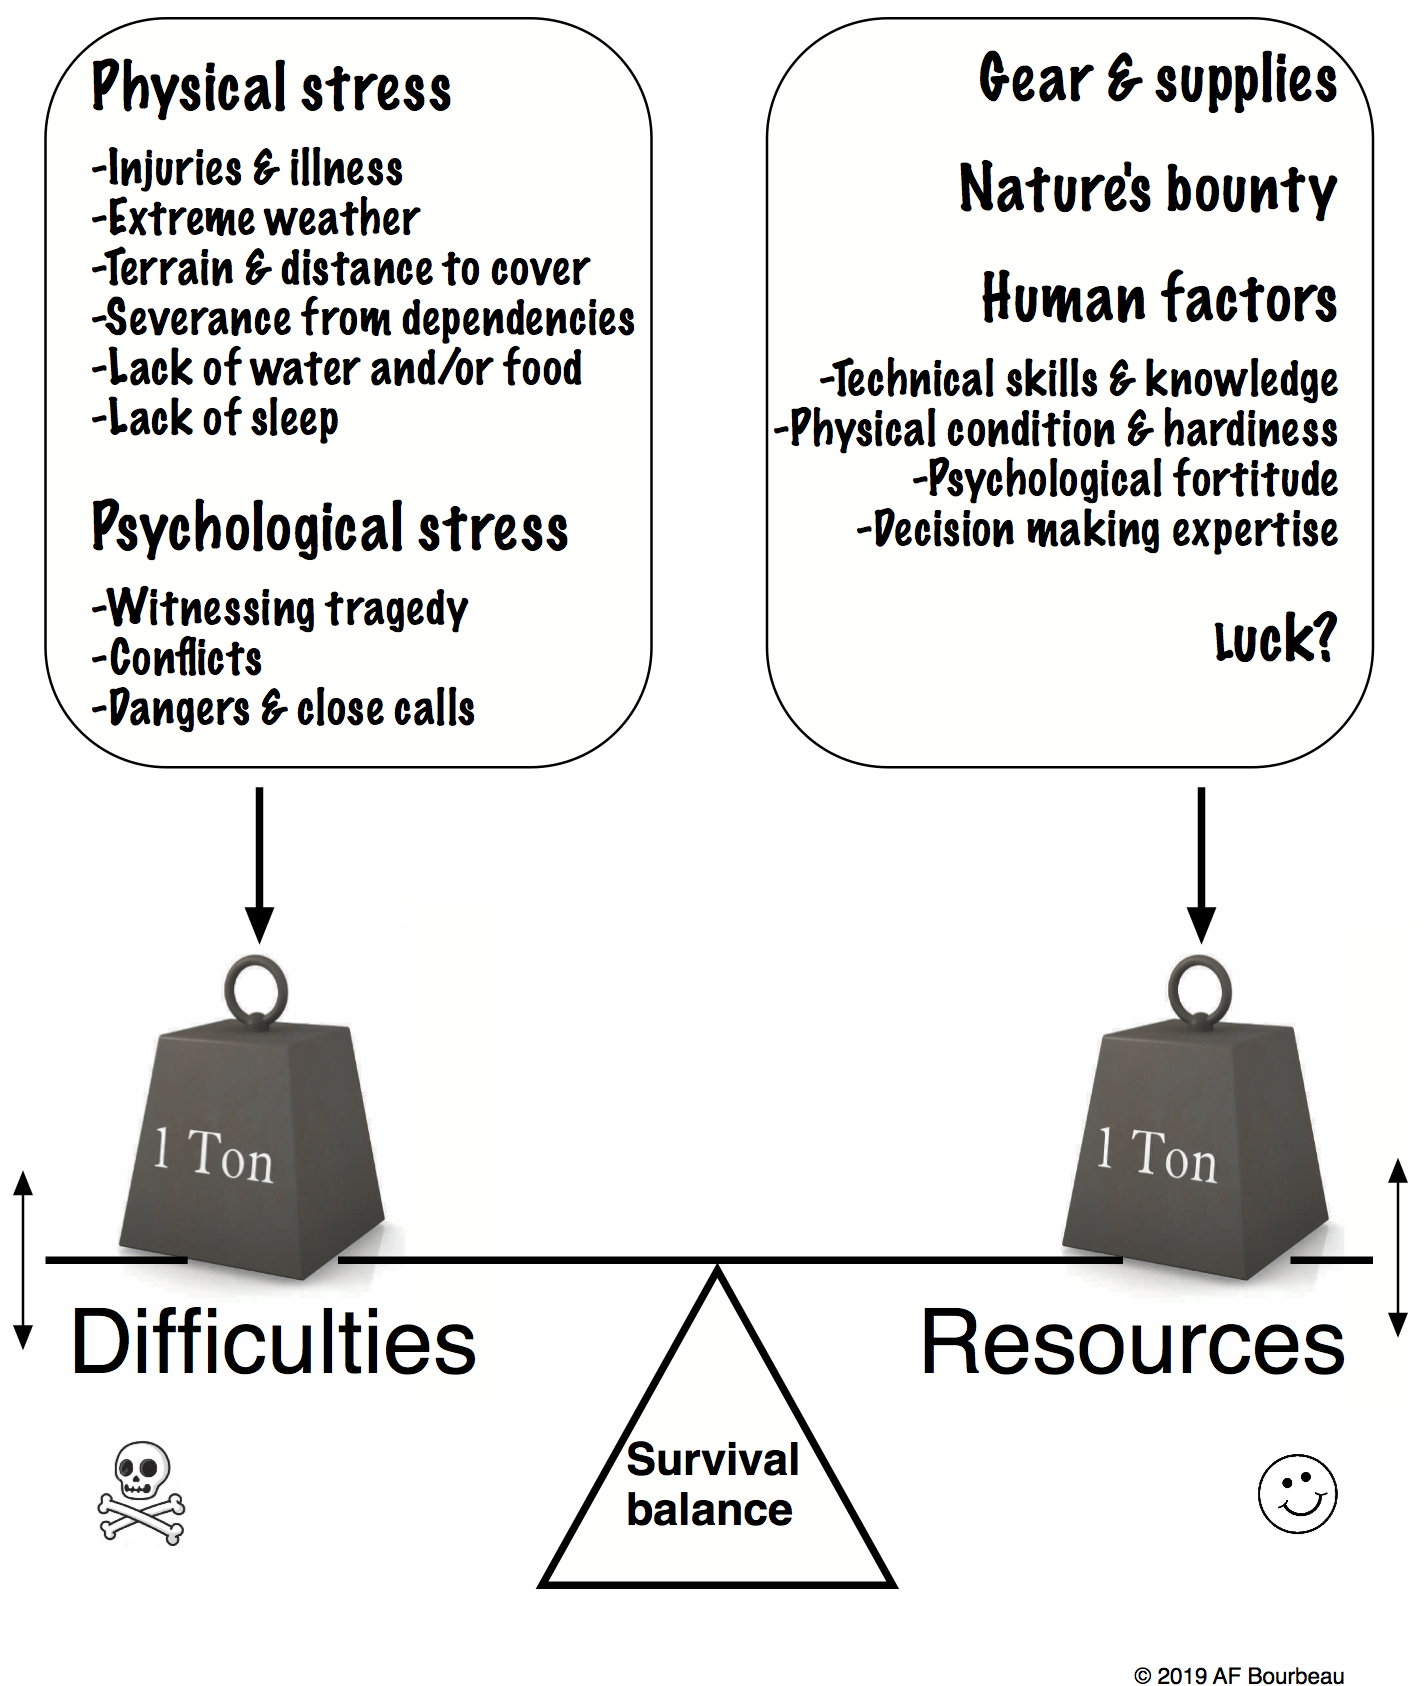 Balancing difficulties (physical and psychological stress) against resources (gear & supplies, nature's bounty, human factors, and luck)